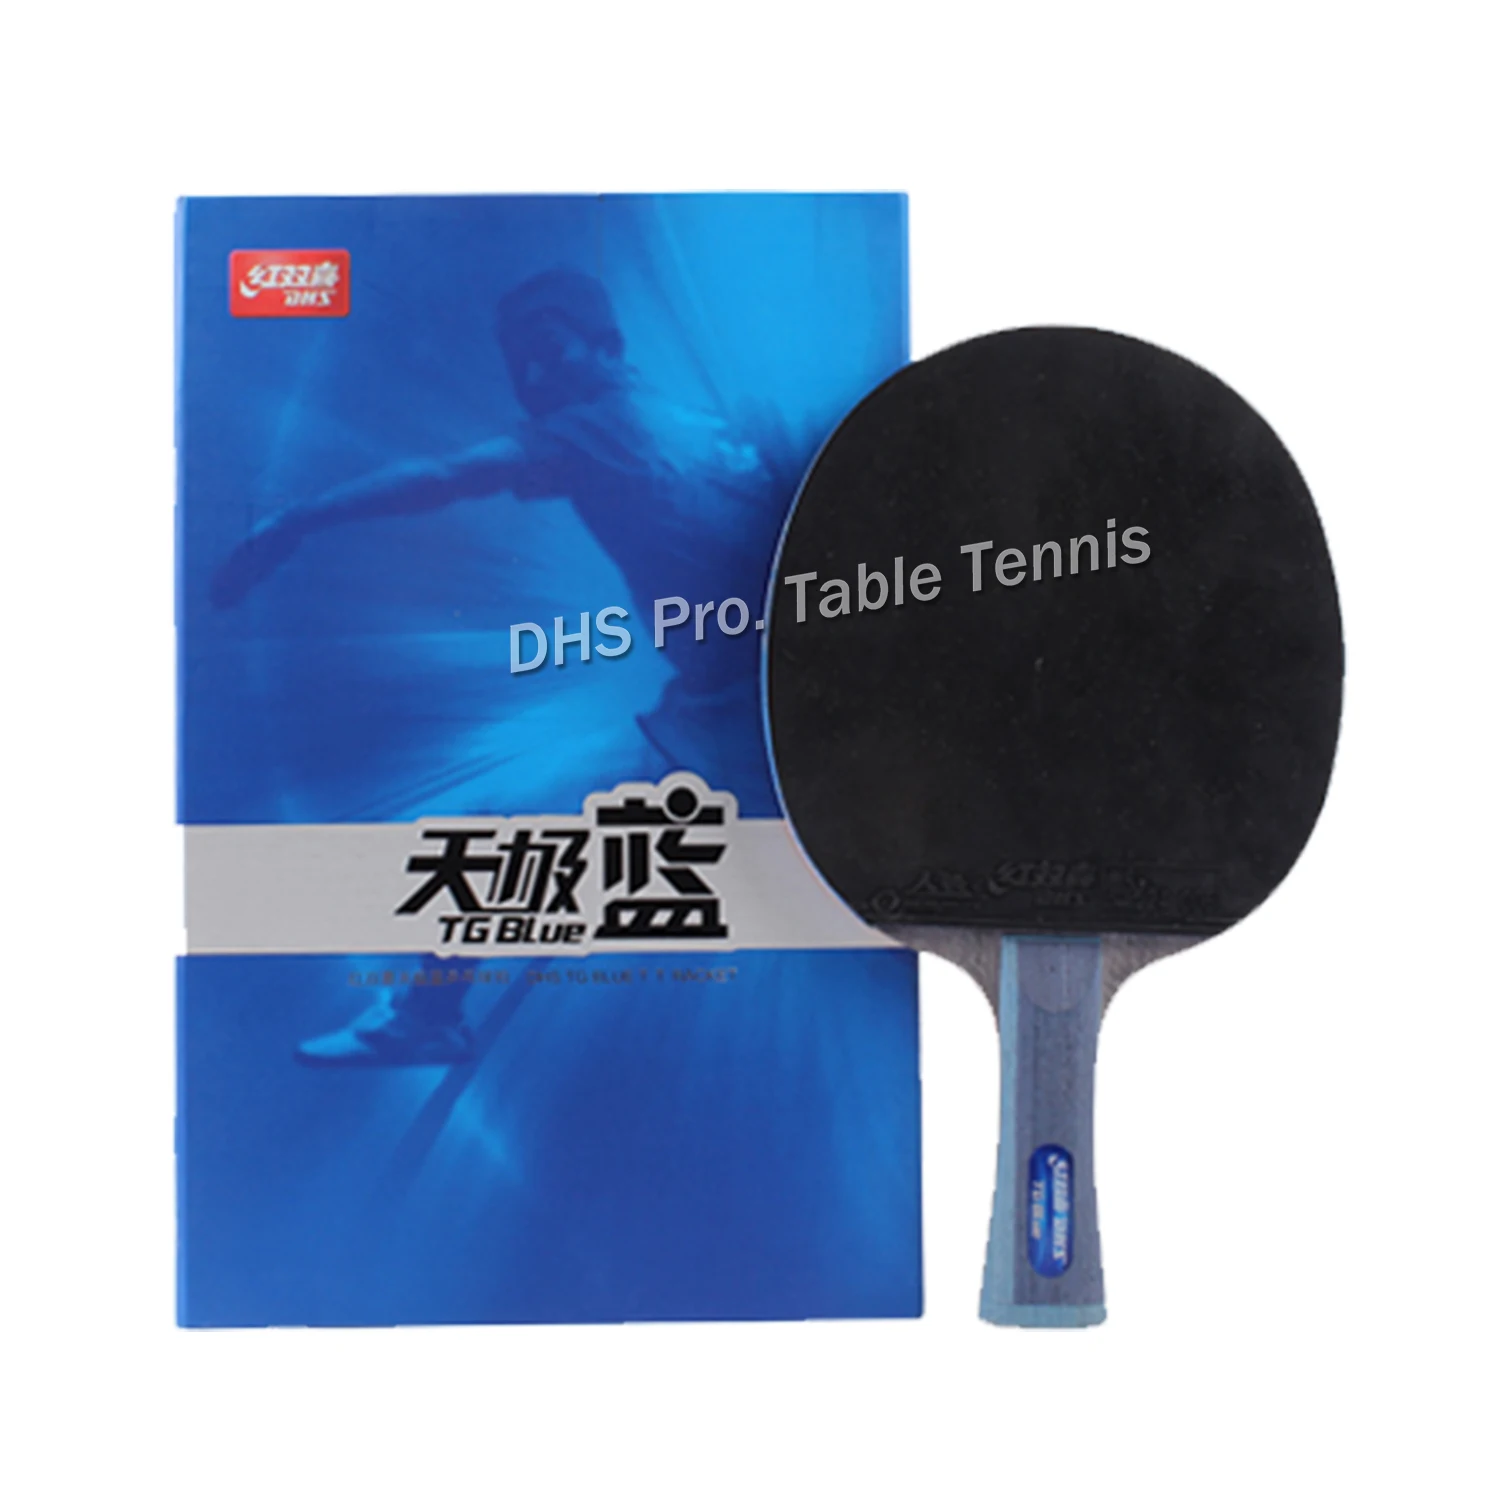 DHS TB series table tennis racket Table tennis racquet ping pong TG BLUE + Tin Arc Sponge pimples in rubbers TB2/TB6